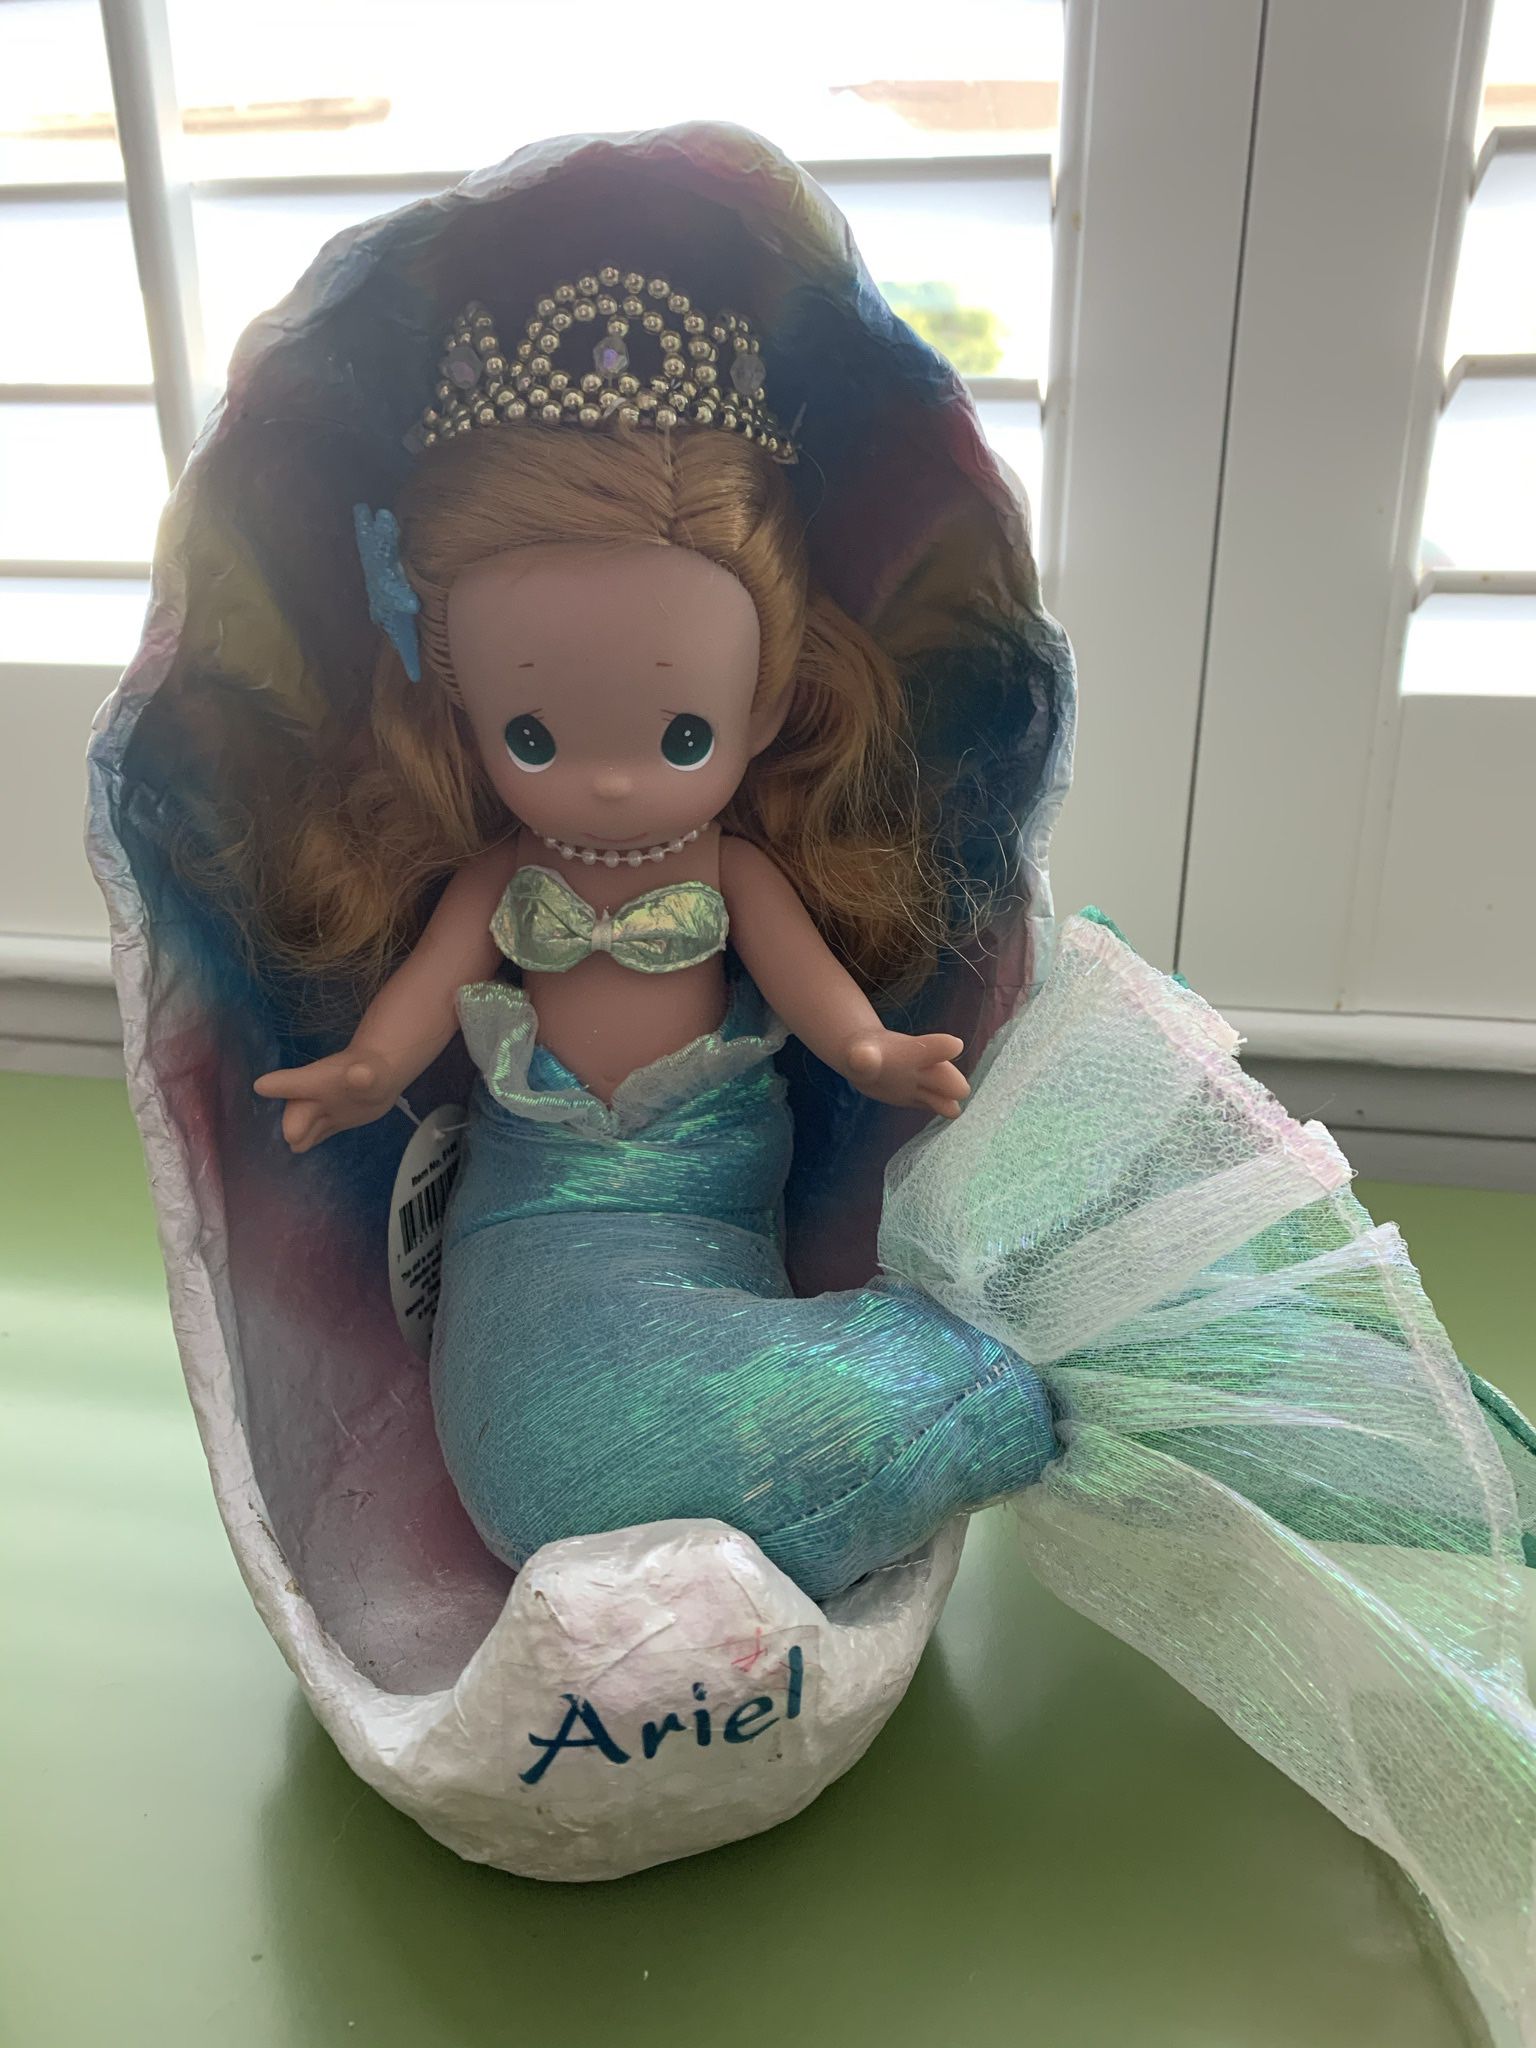 Disney Precious Moments Ariel in shell doll.  Soft body and vinyl head and arms.  Approx 10”H. She is in excellent condition. 